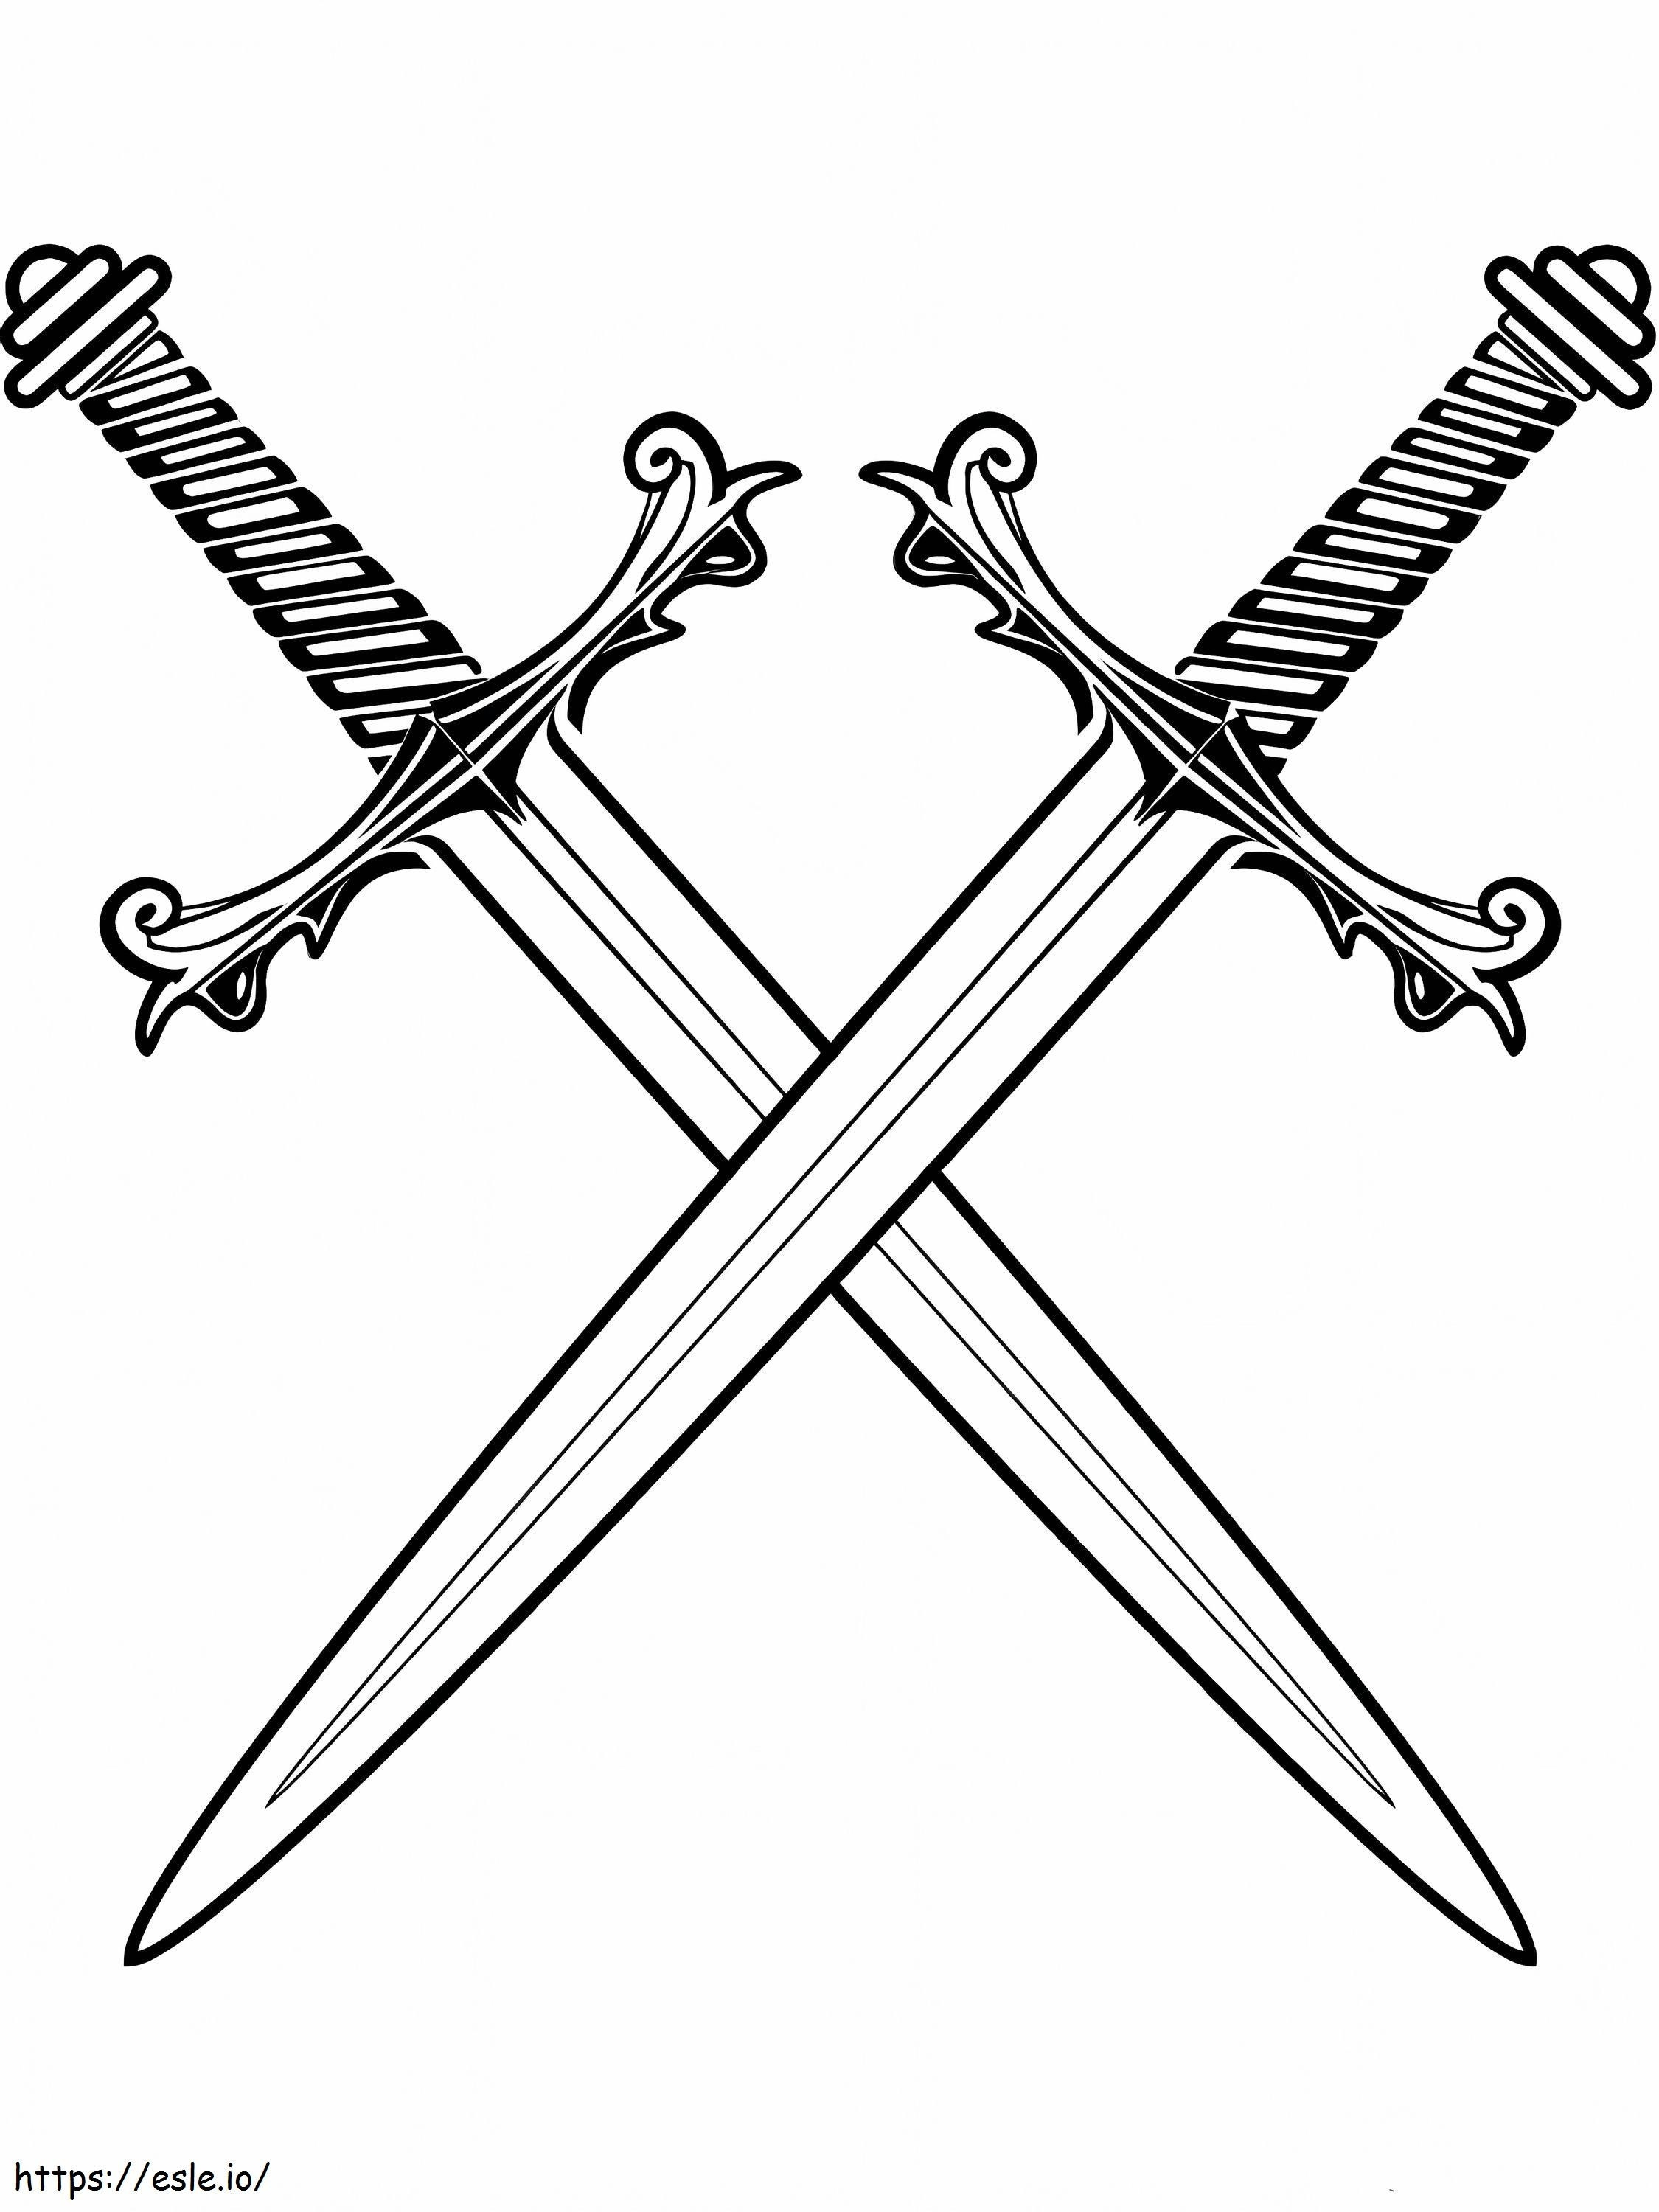 Two Swords coloring page